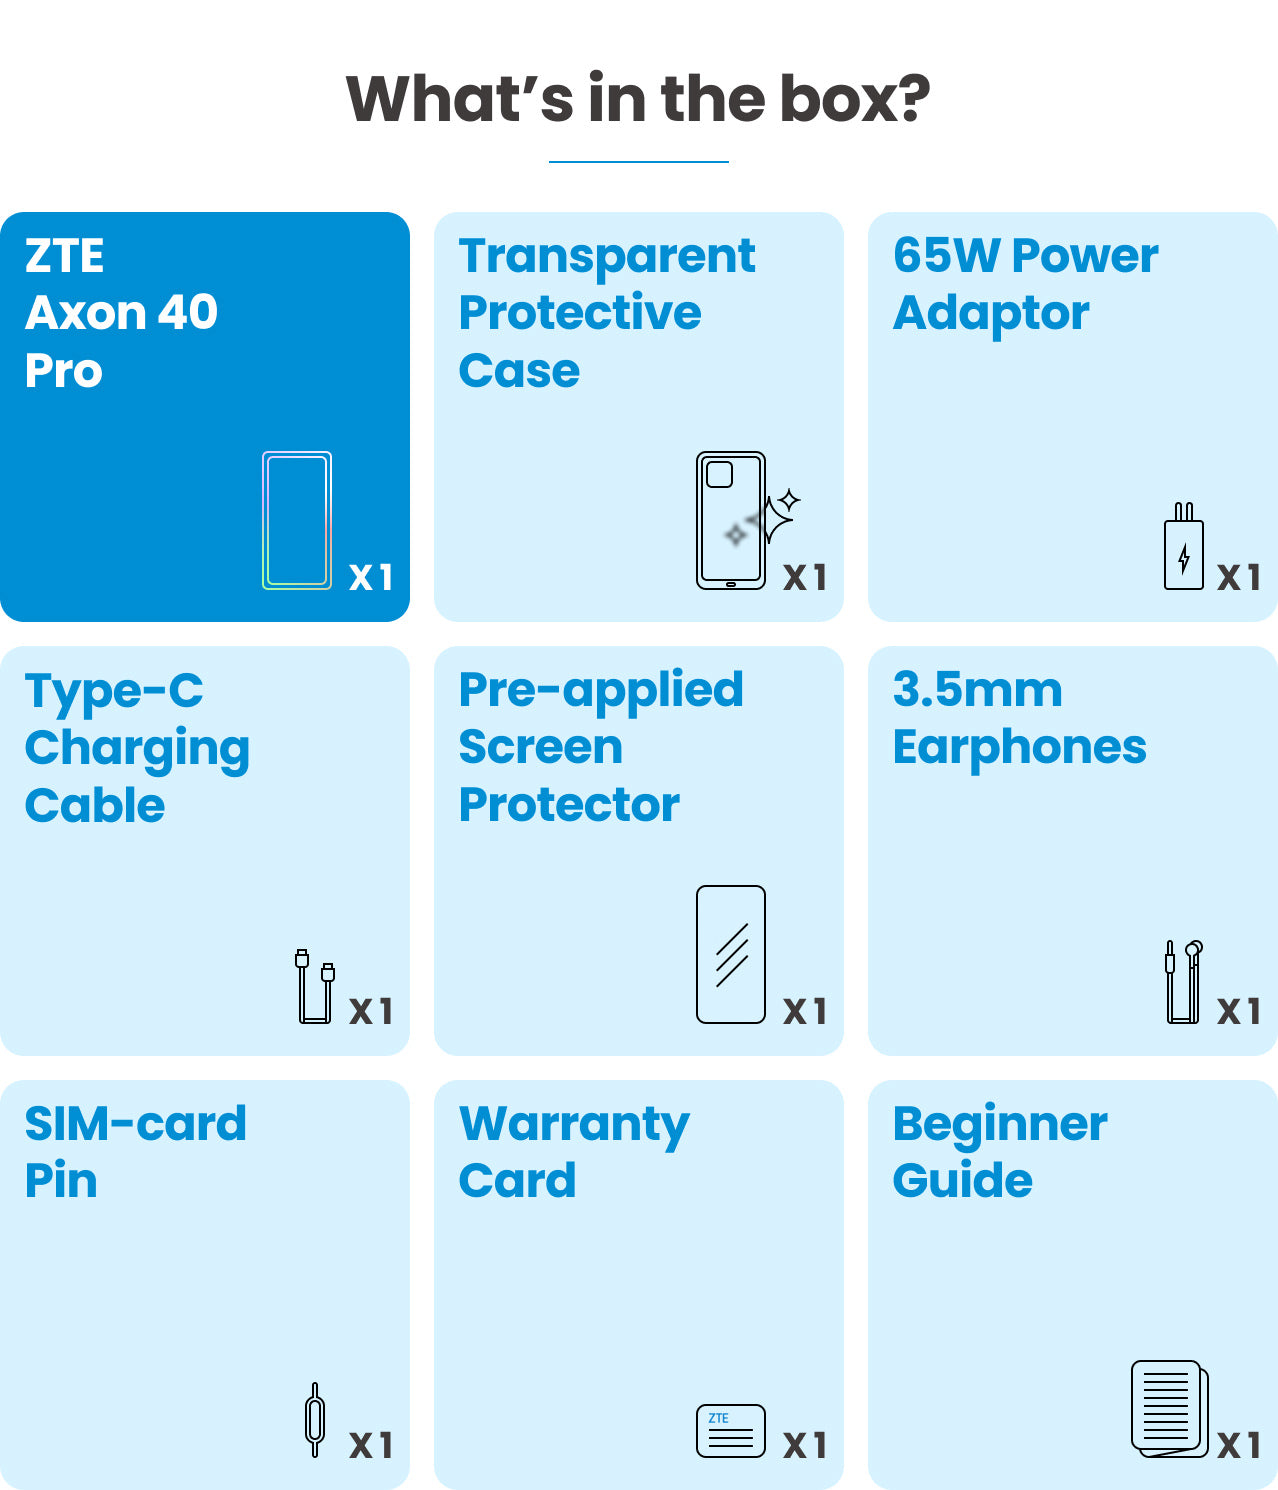 What’s in the box: 1/ One ZTE Axon 40 Pro; 2/ One Transparent Protective Case; 3/One 65W Power Adaptor; 4/One Type-C Charging Cable; 5/ One Pre-applied Screen Protector; 6/ One  3.5mm Earphones; 7/ One SIM-card Pin; 8/ One Warranty Card; 9/ One Beginner Guide